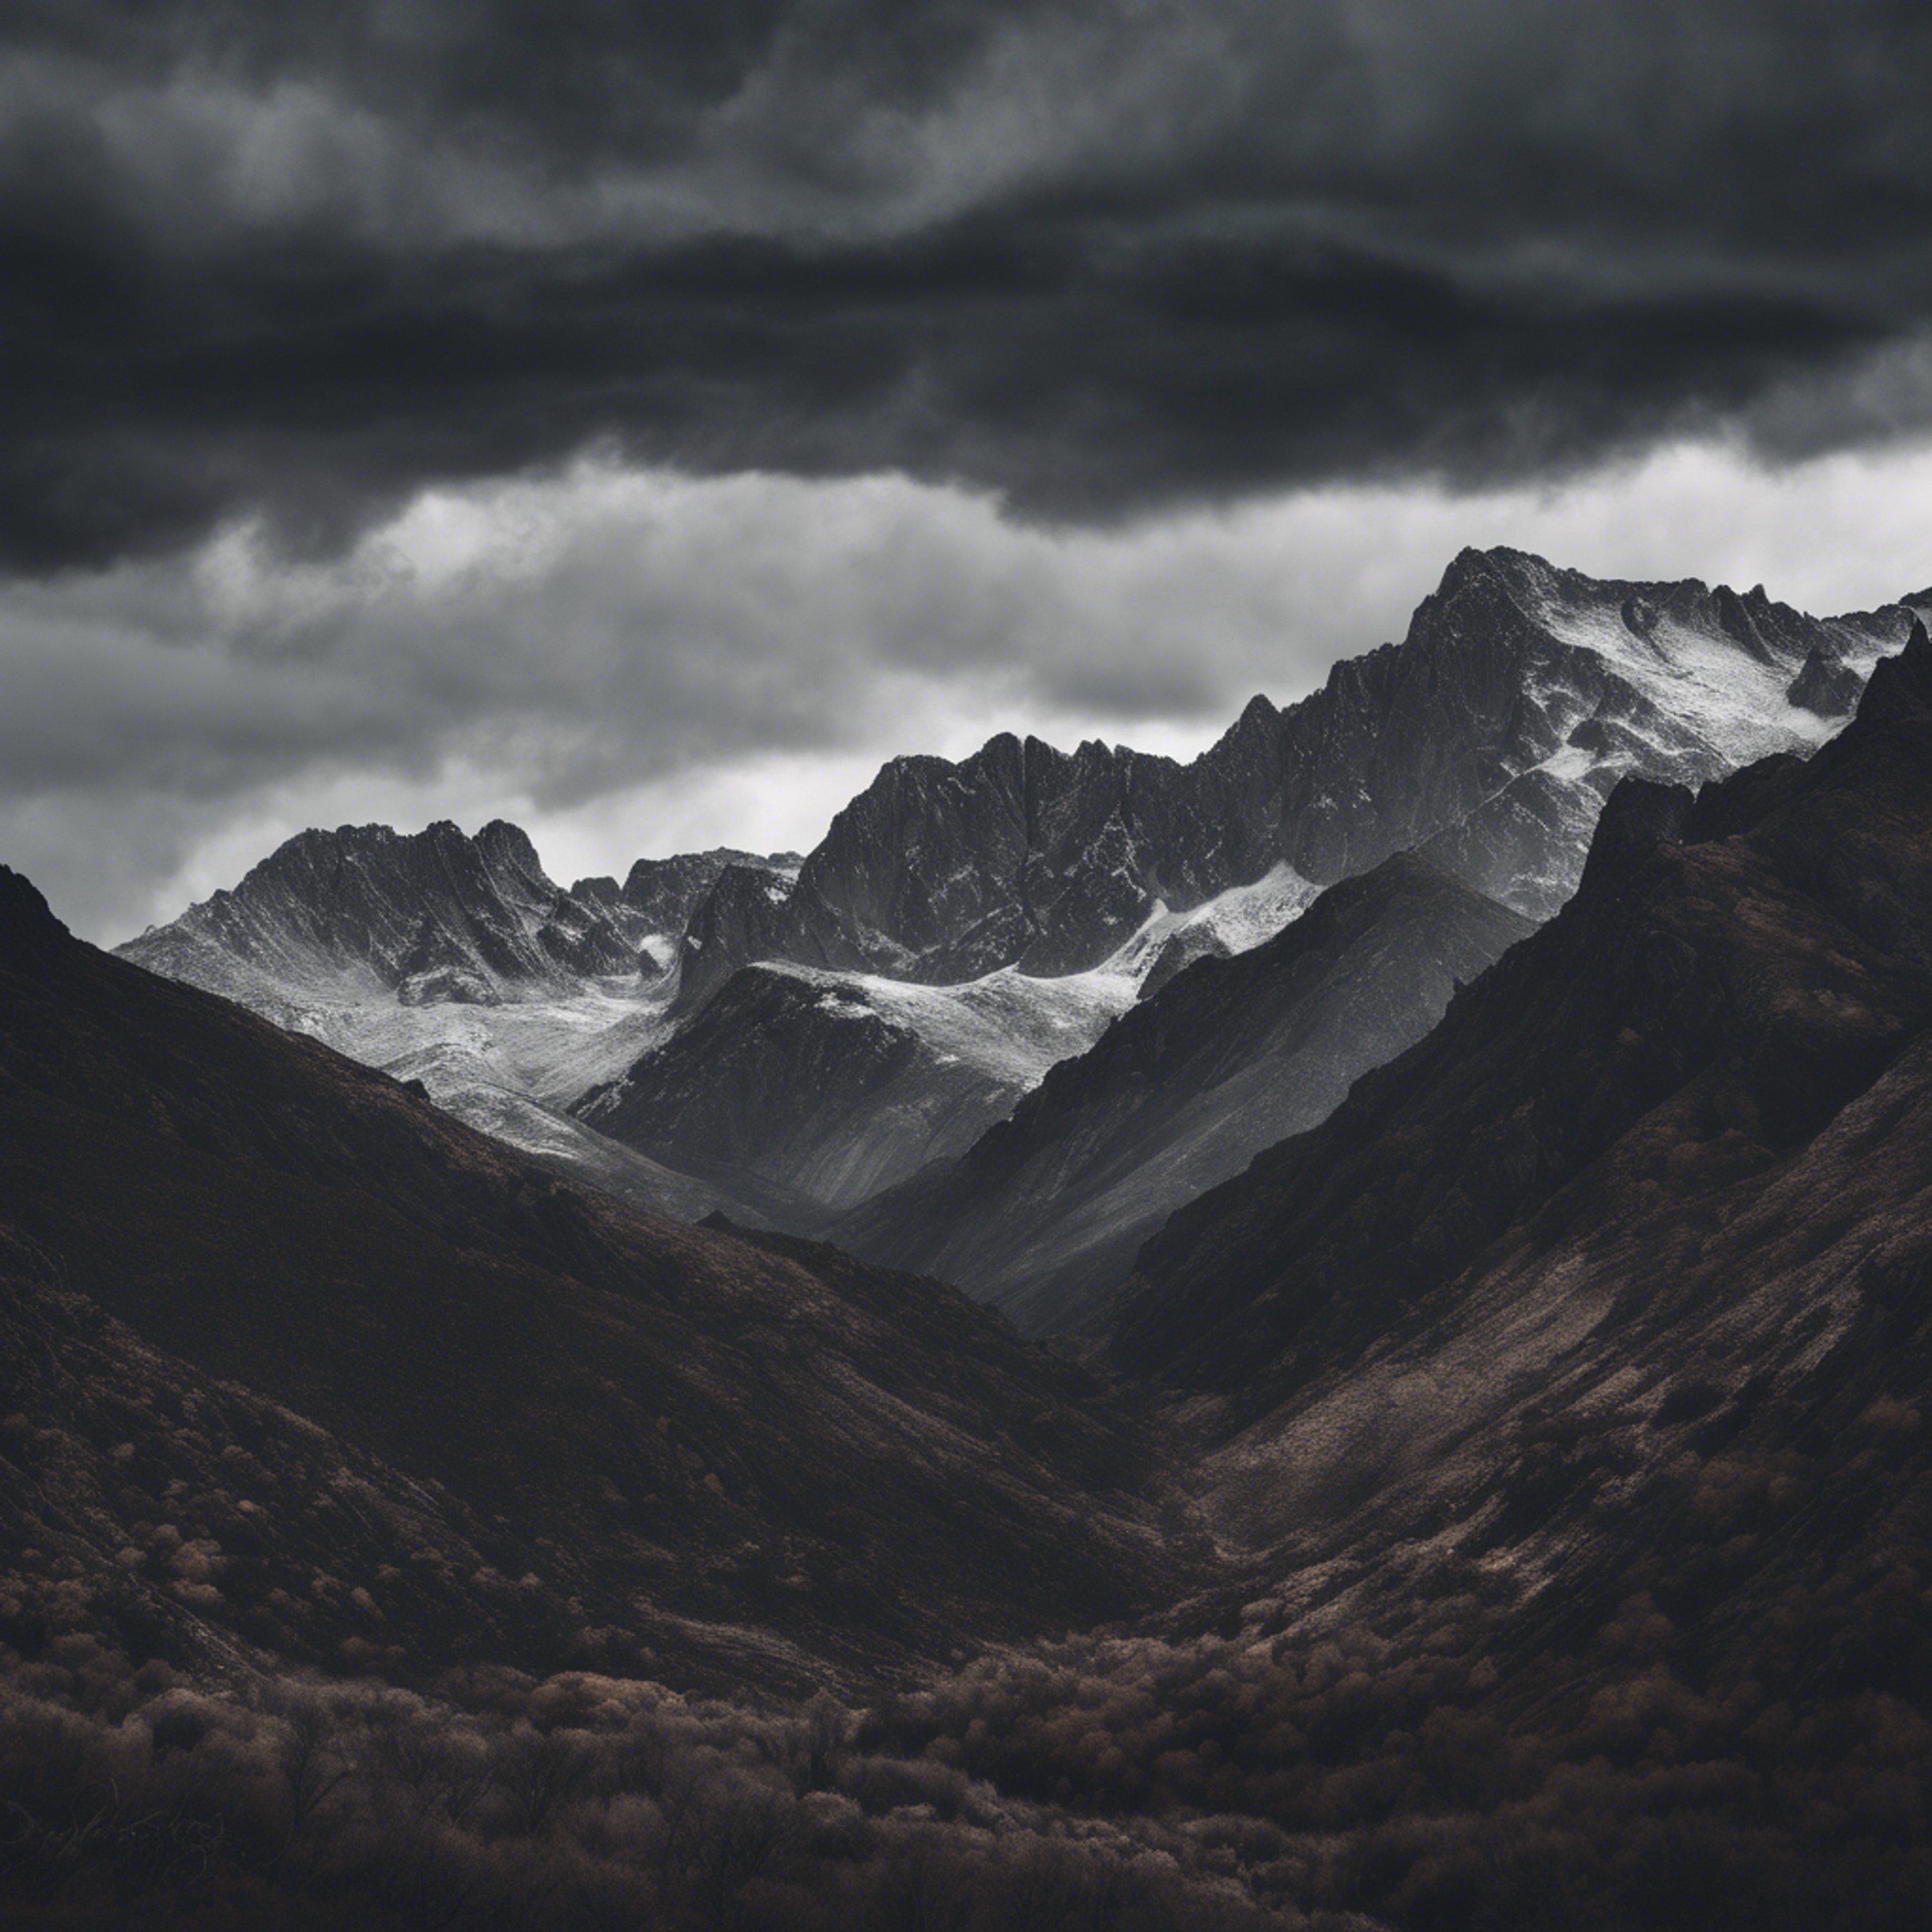 A rugged black and gray mountain range under a stormy skies.壁紙[bbf48e9891544a6fb579]